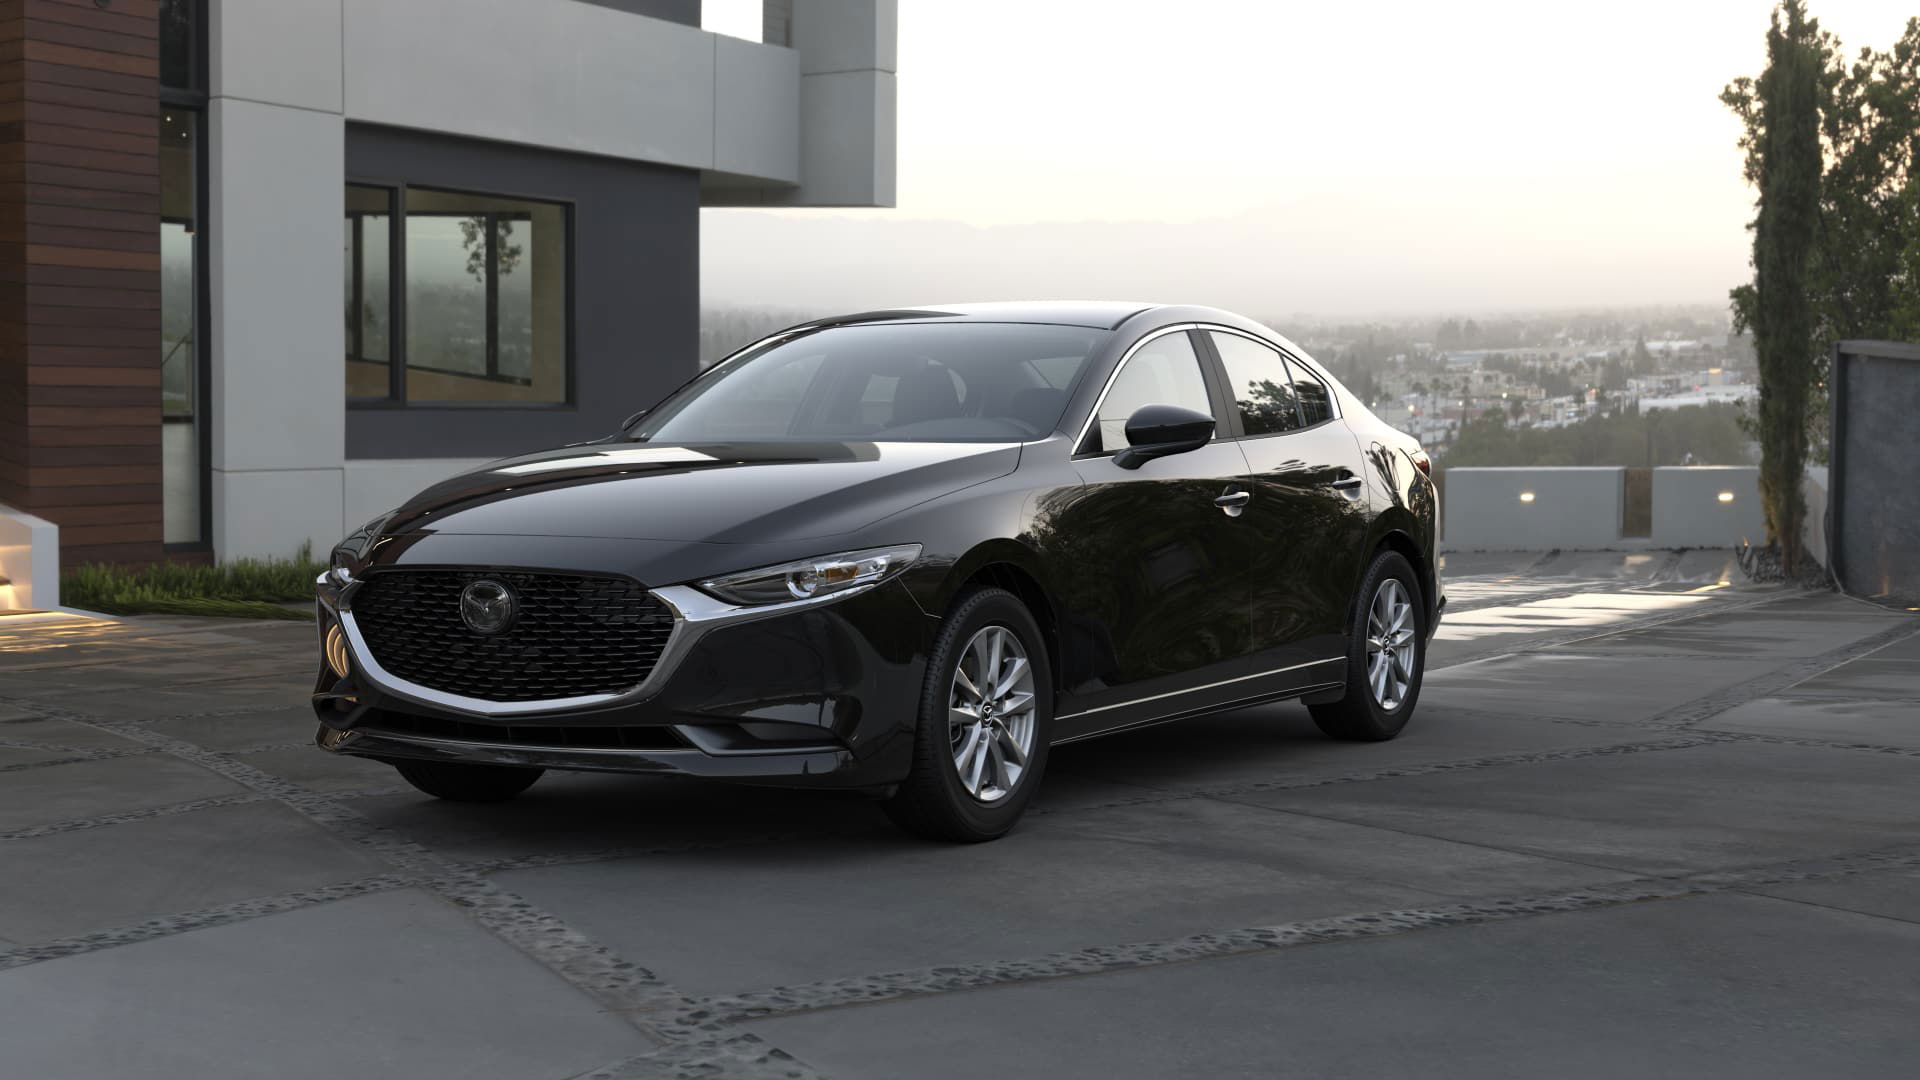 Best cars for college students - Mazda3.